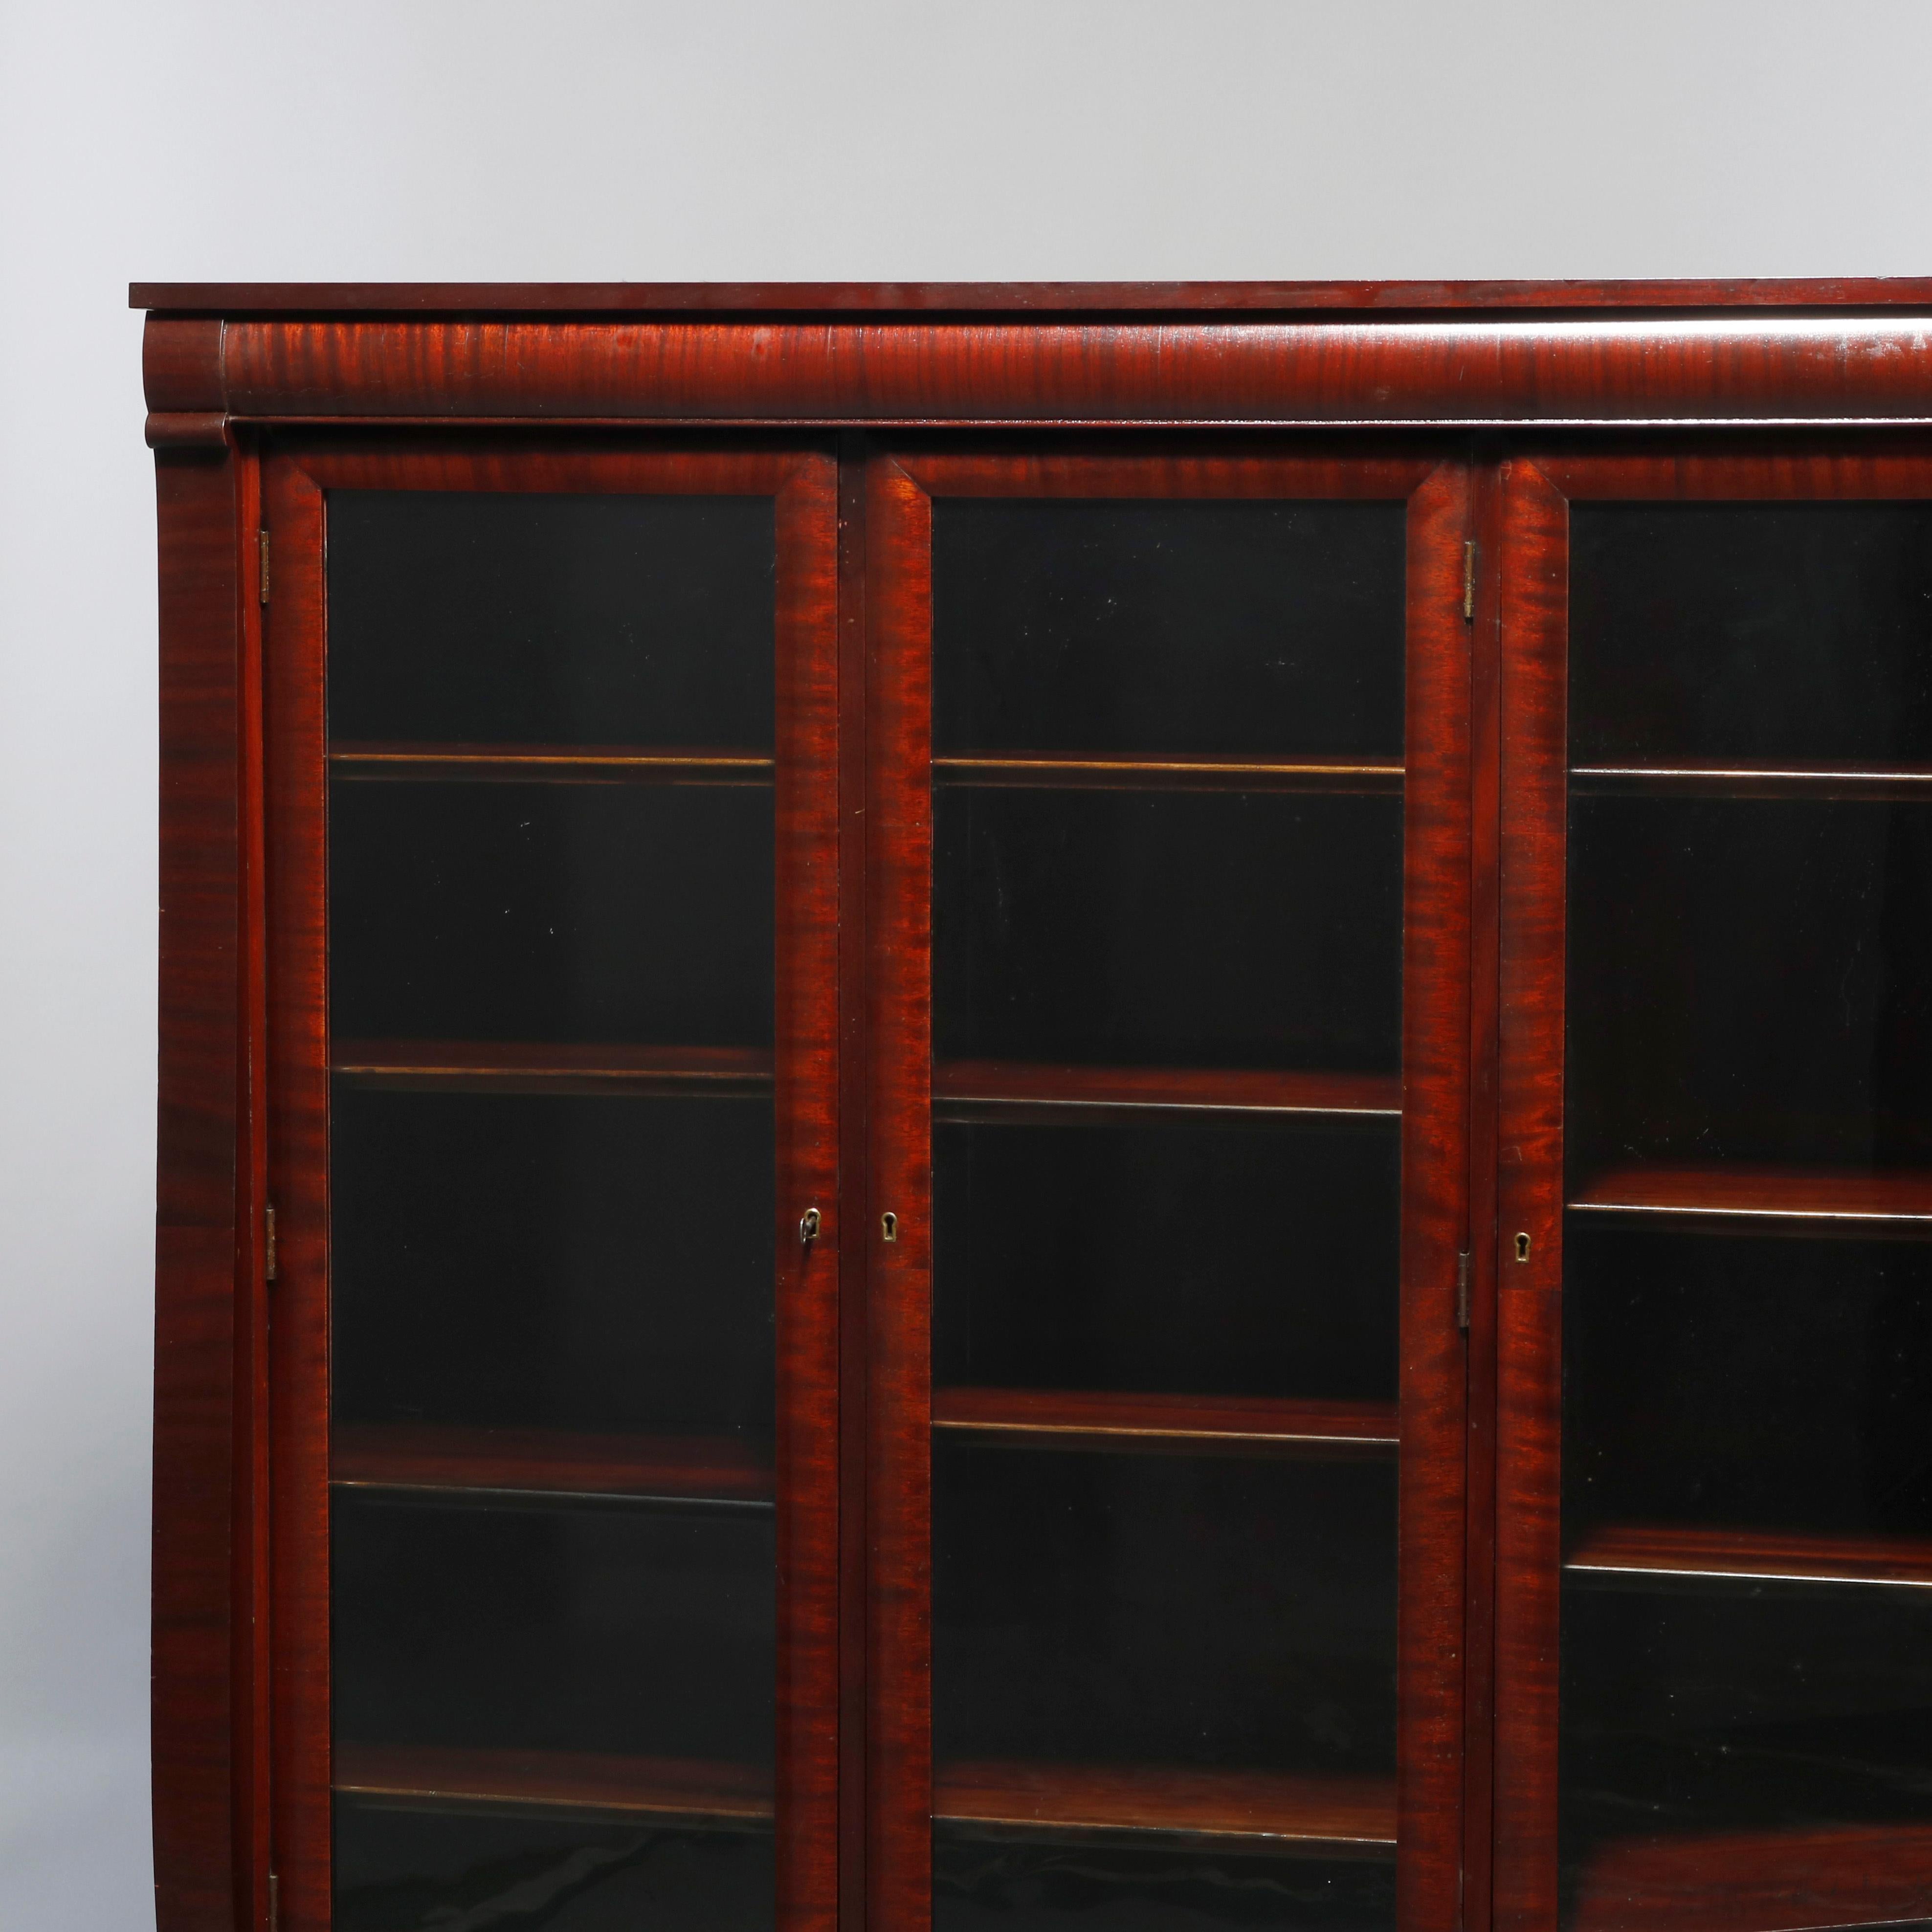 An antique American Empire style bookcase offers flame mahogany construction with three glass doors opening to shelved interior, raised on scroll form legs, c1890

Measures: 59